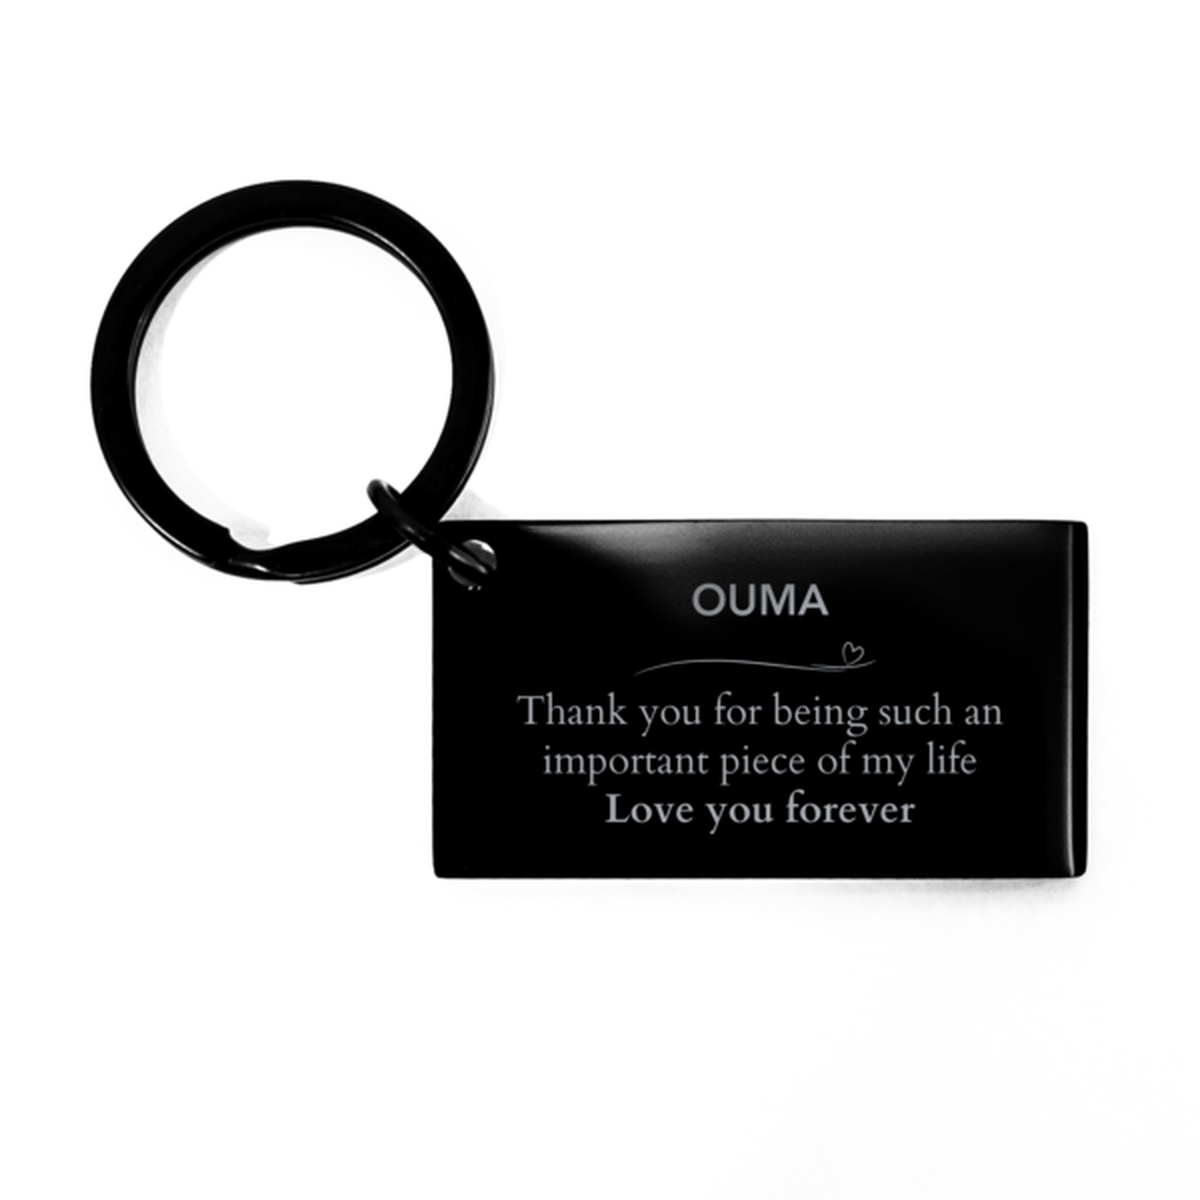 Appropriate Ouma Keychain Epic Birthday Gifts for Ouma Thank you for being such an important piece of my life Ouma Christmas Mothers Fathers Day